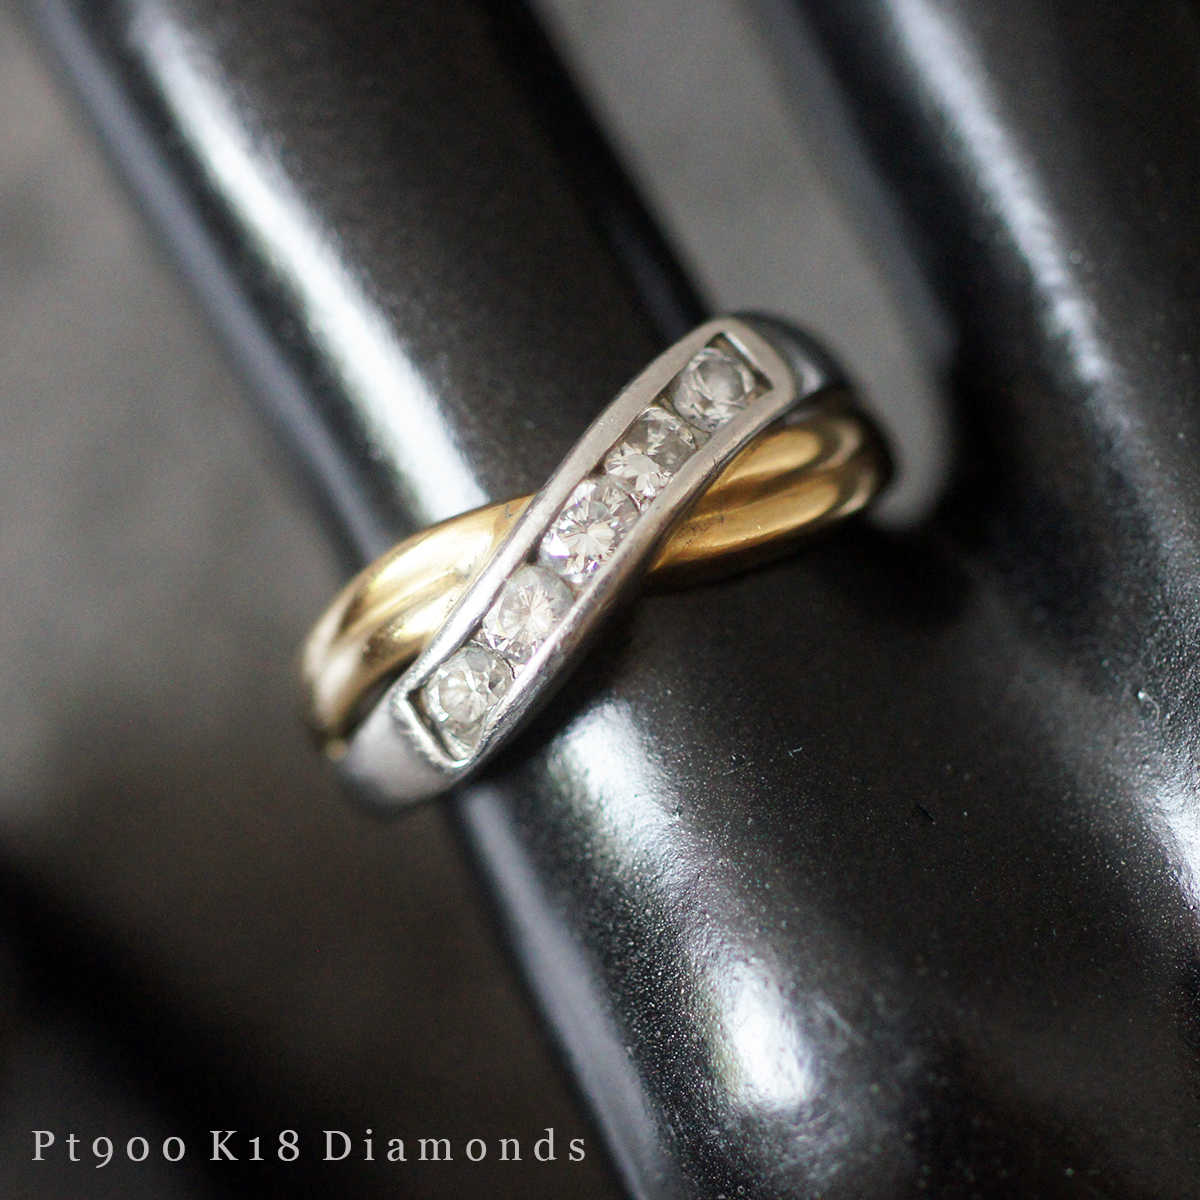 K18 YG Pt 900 0.51ct one character natural diamond Vintage ring 13 number 5.3g lady's ring accessory 750 platinum Gold 